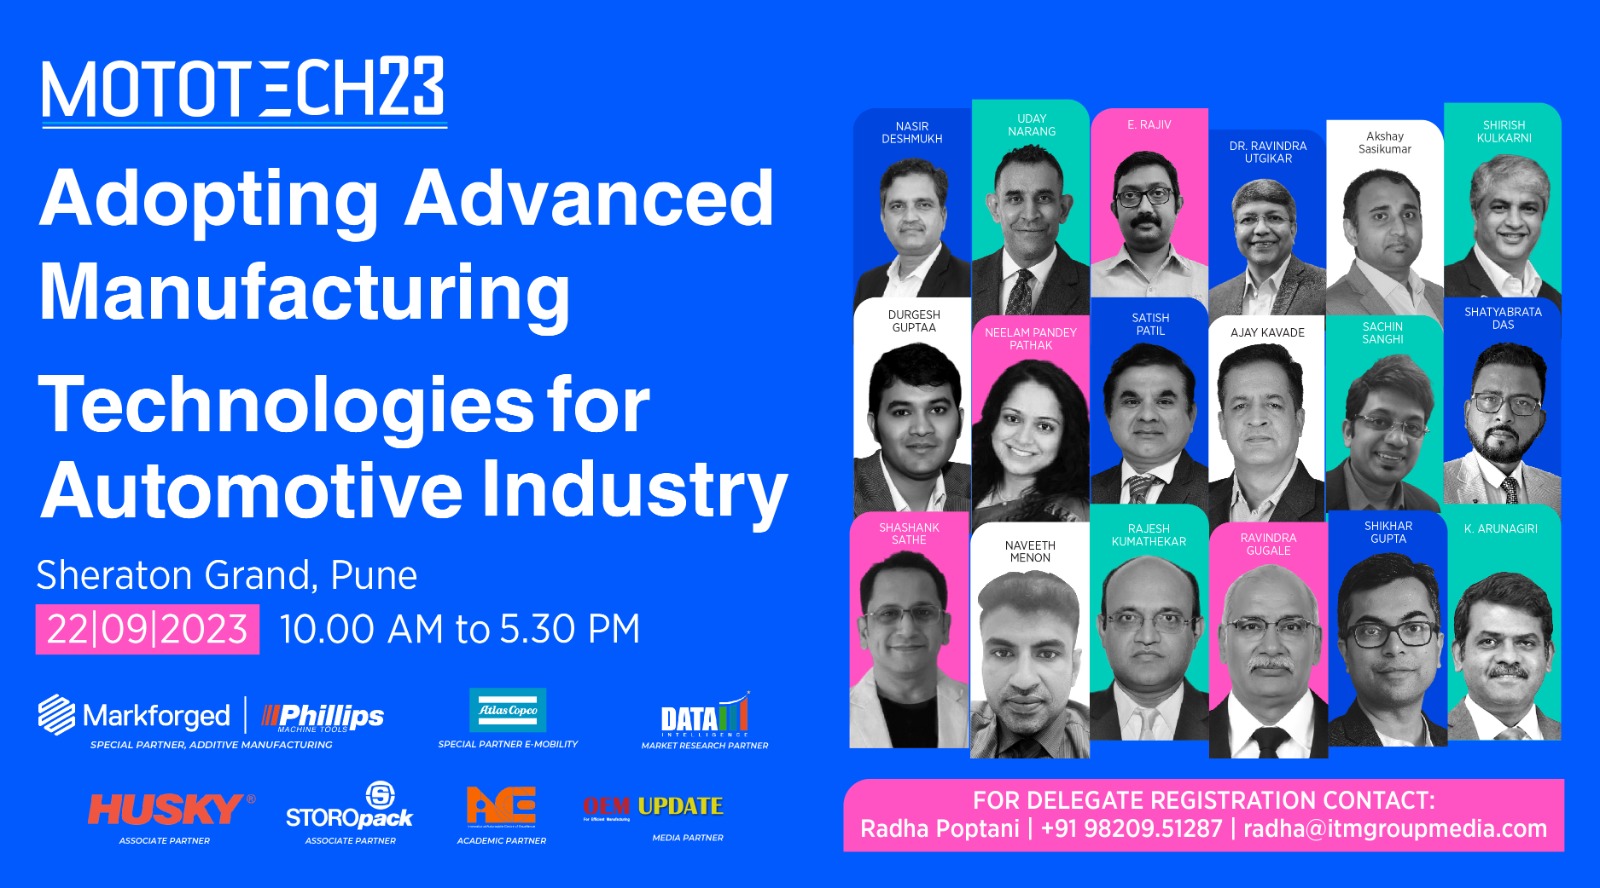 Nasir Deshmukh, Sr. Vice President of Manufacturing Operations at M&M takes the helm as Conference Chairman for MOTOTECH23 to power automotive innovations